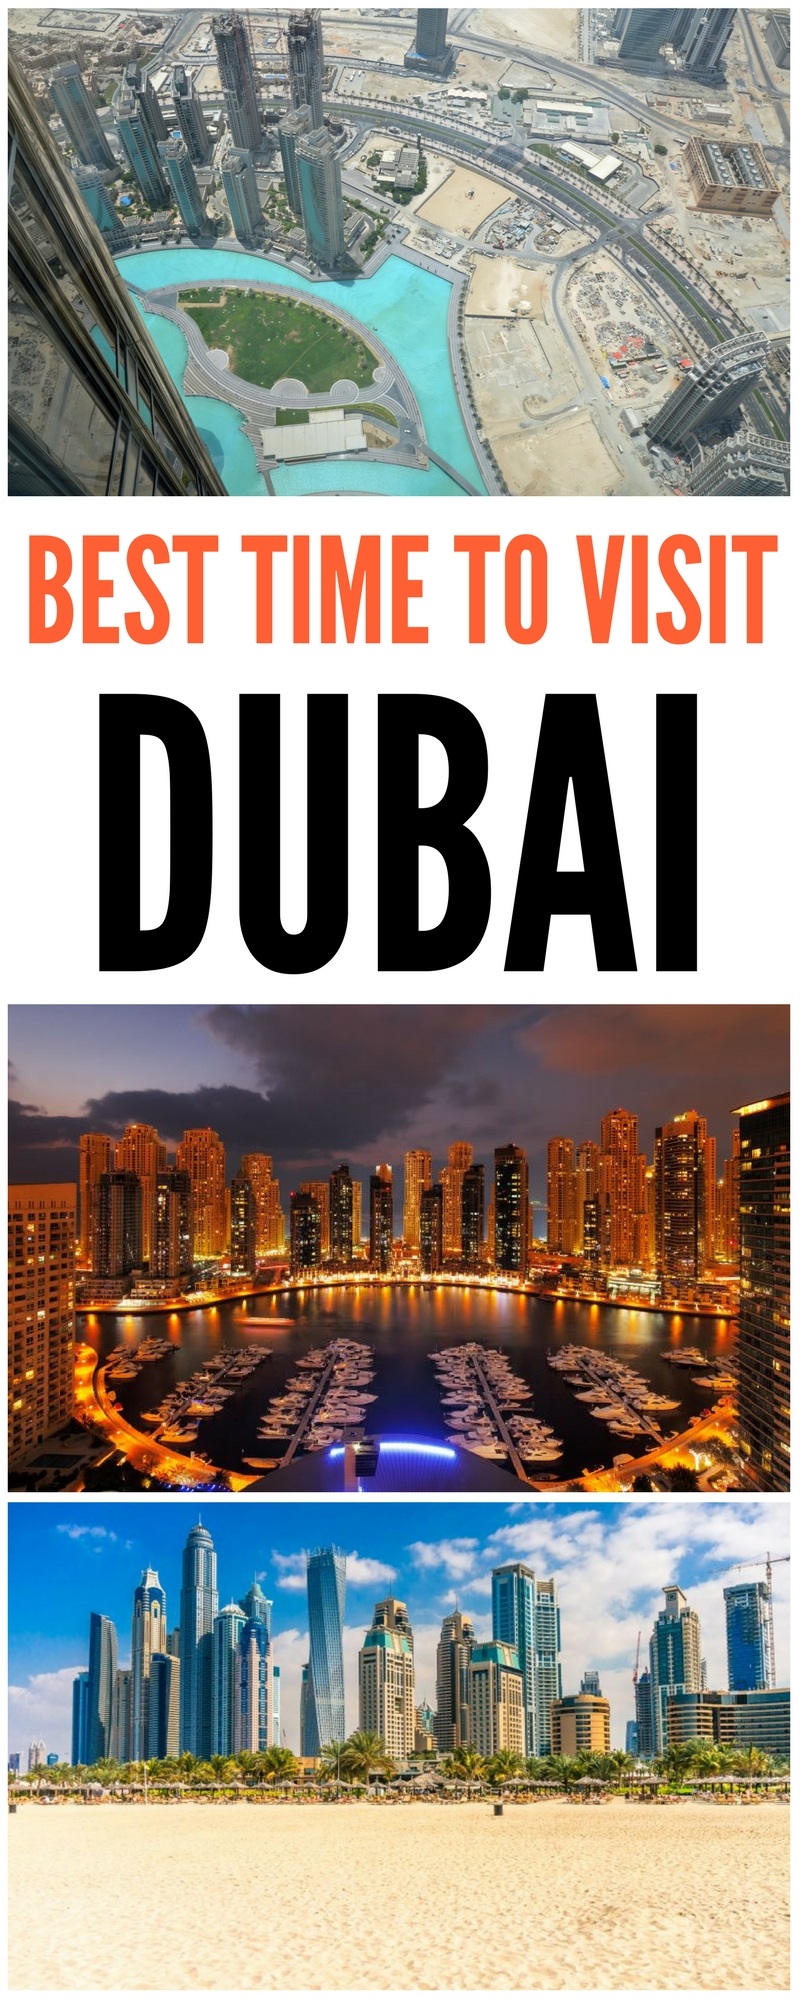 Dubai - when to visit. Well, the truth is you can go anytime but to really maximize your experience, you want to be there when the weather isn’t too hot so you can hit the beaches as well as the mile long designer malls.